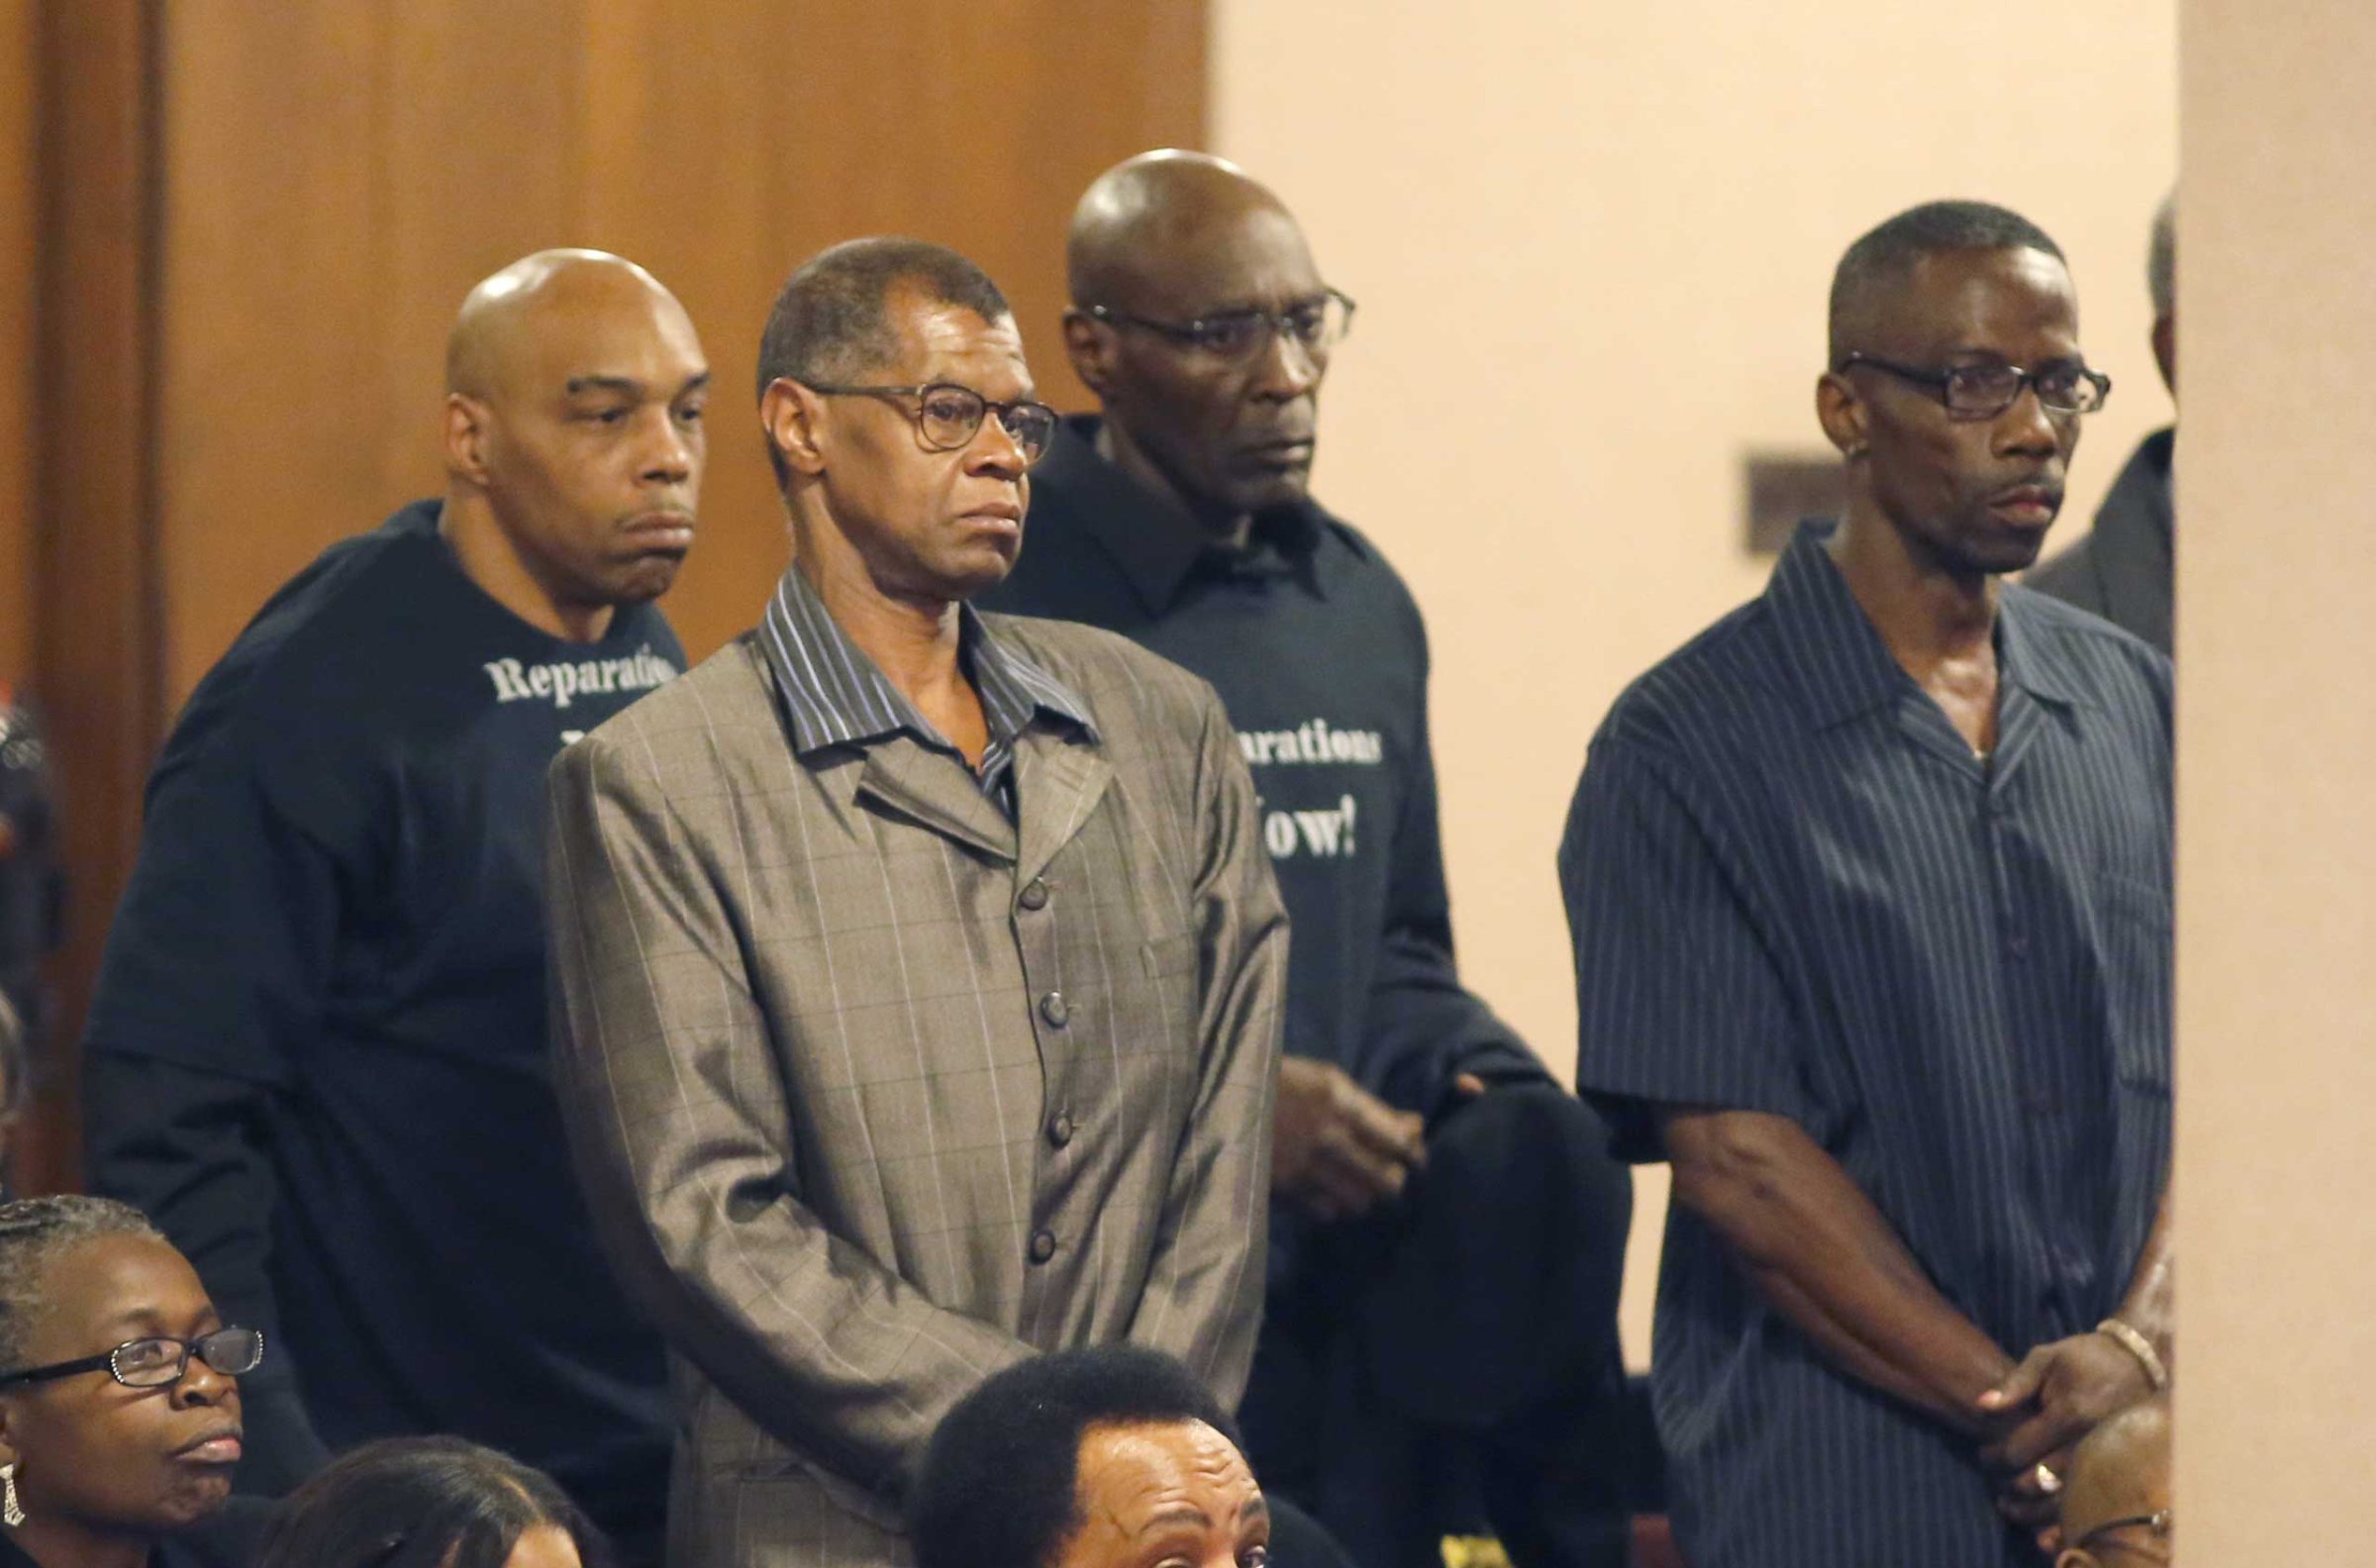 Men identified as victims of police torture under the command of retired Chicago Police Commander Jon Burge, stand to be recognized by the Chicago City Council city council, May 6, 2015, in Chicago.